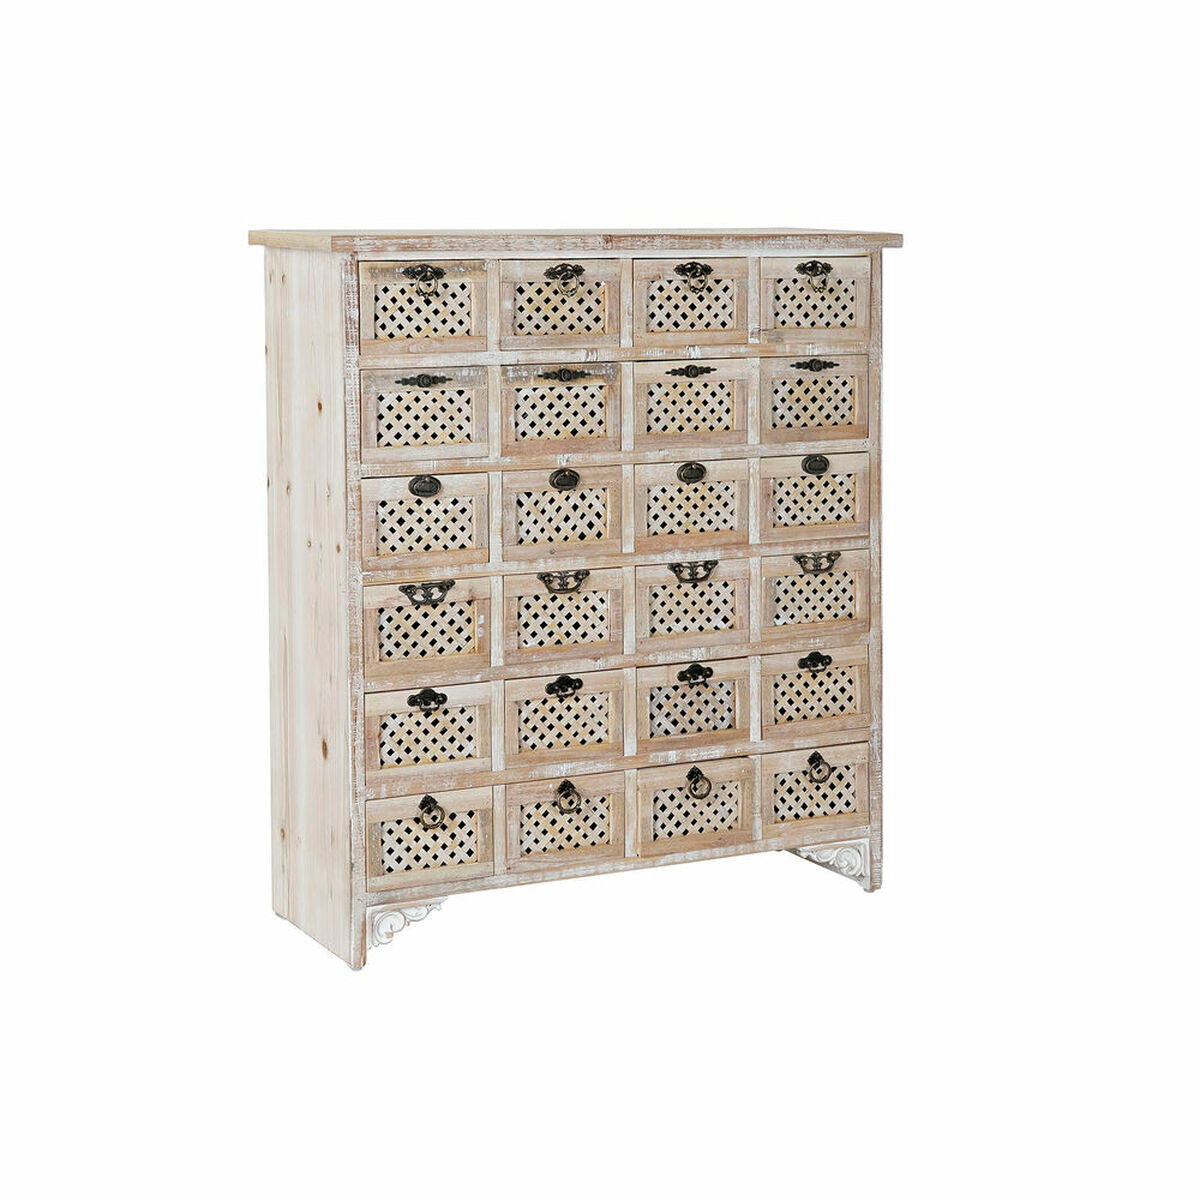 Chest of drawers in Wood and Cottage Style (89 x 30 x 98 cm)